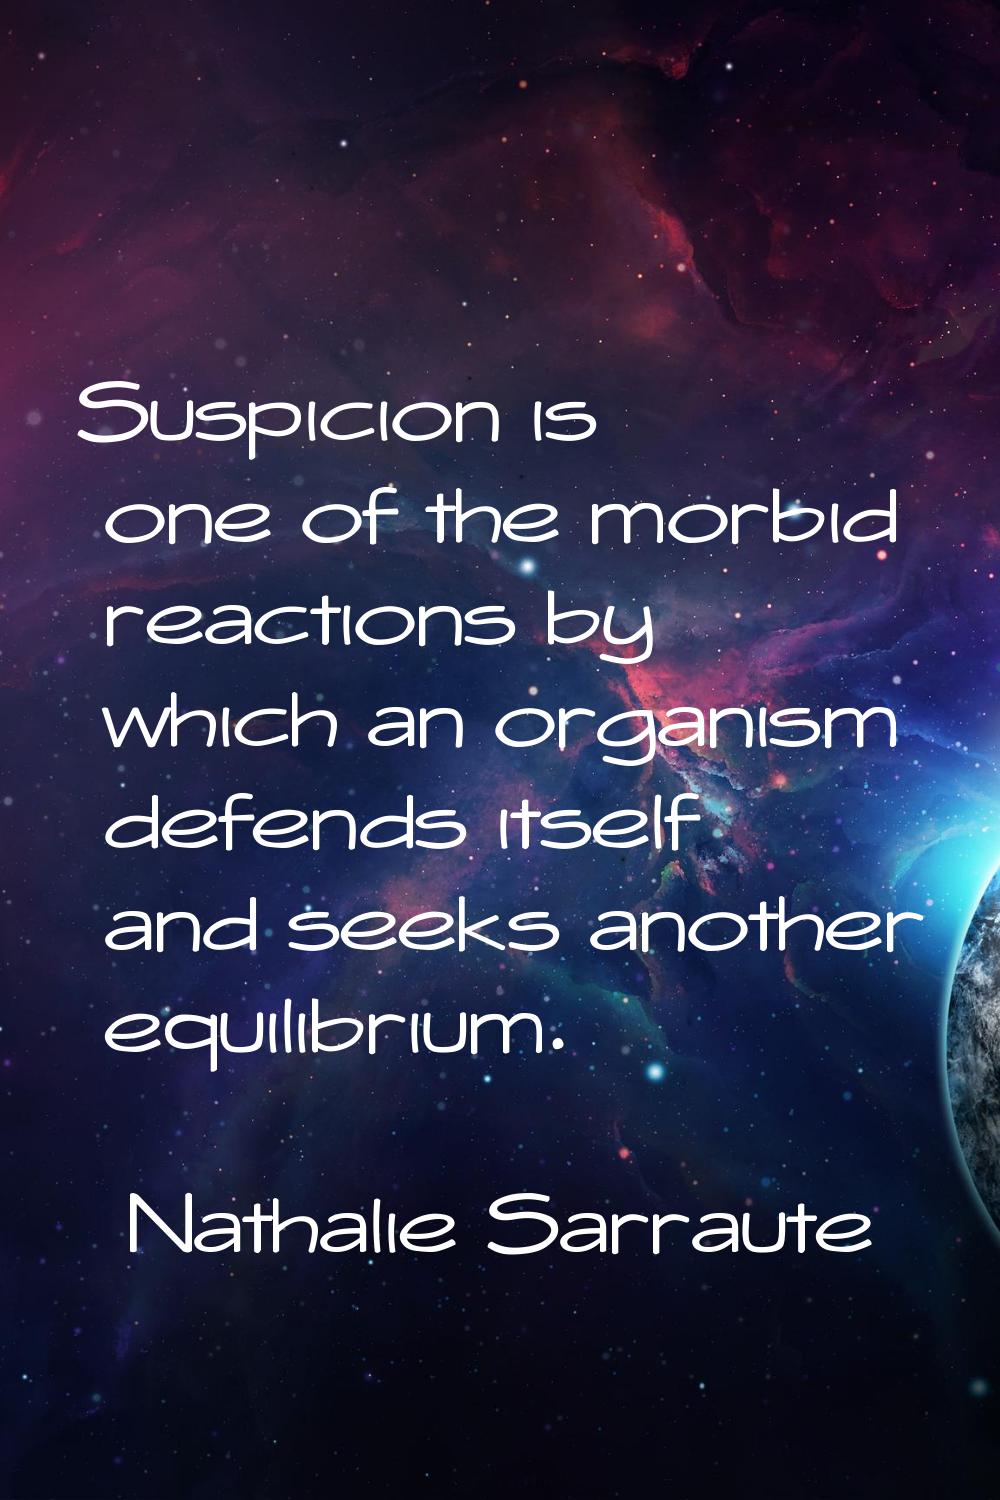 Suspicion is one of the morbid reactions by which an organism defends itself and seeks another equi